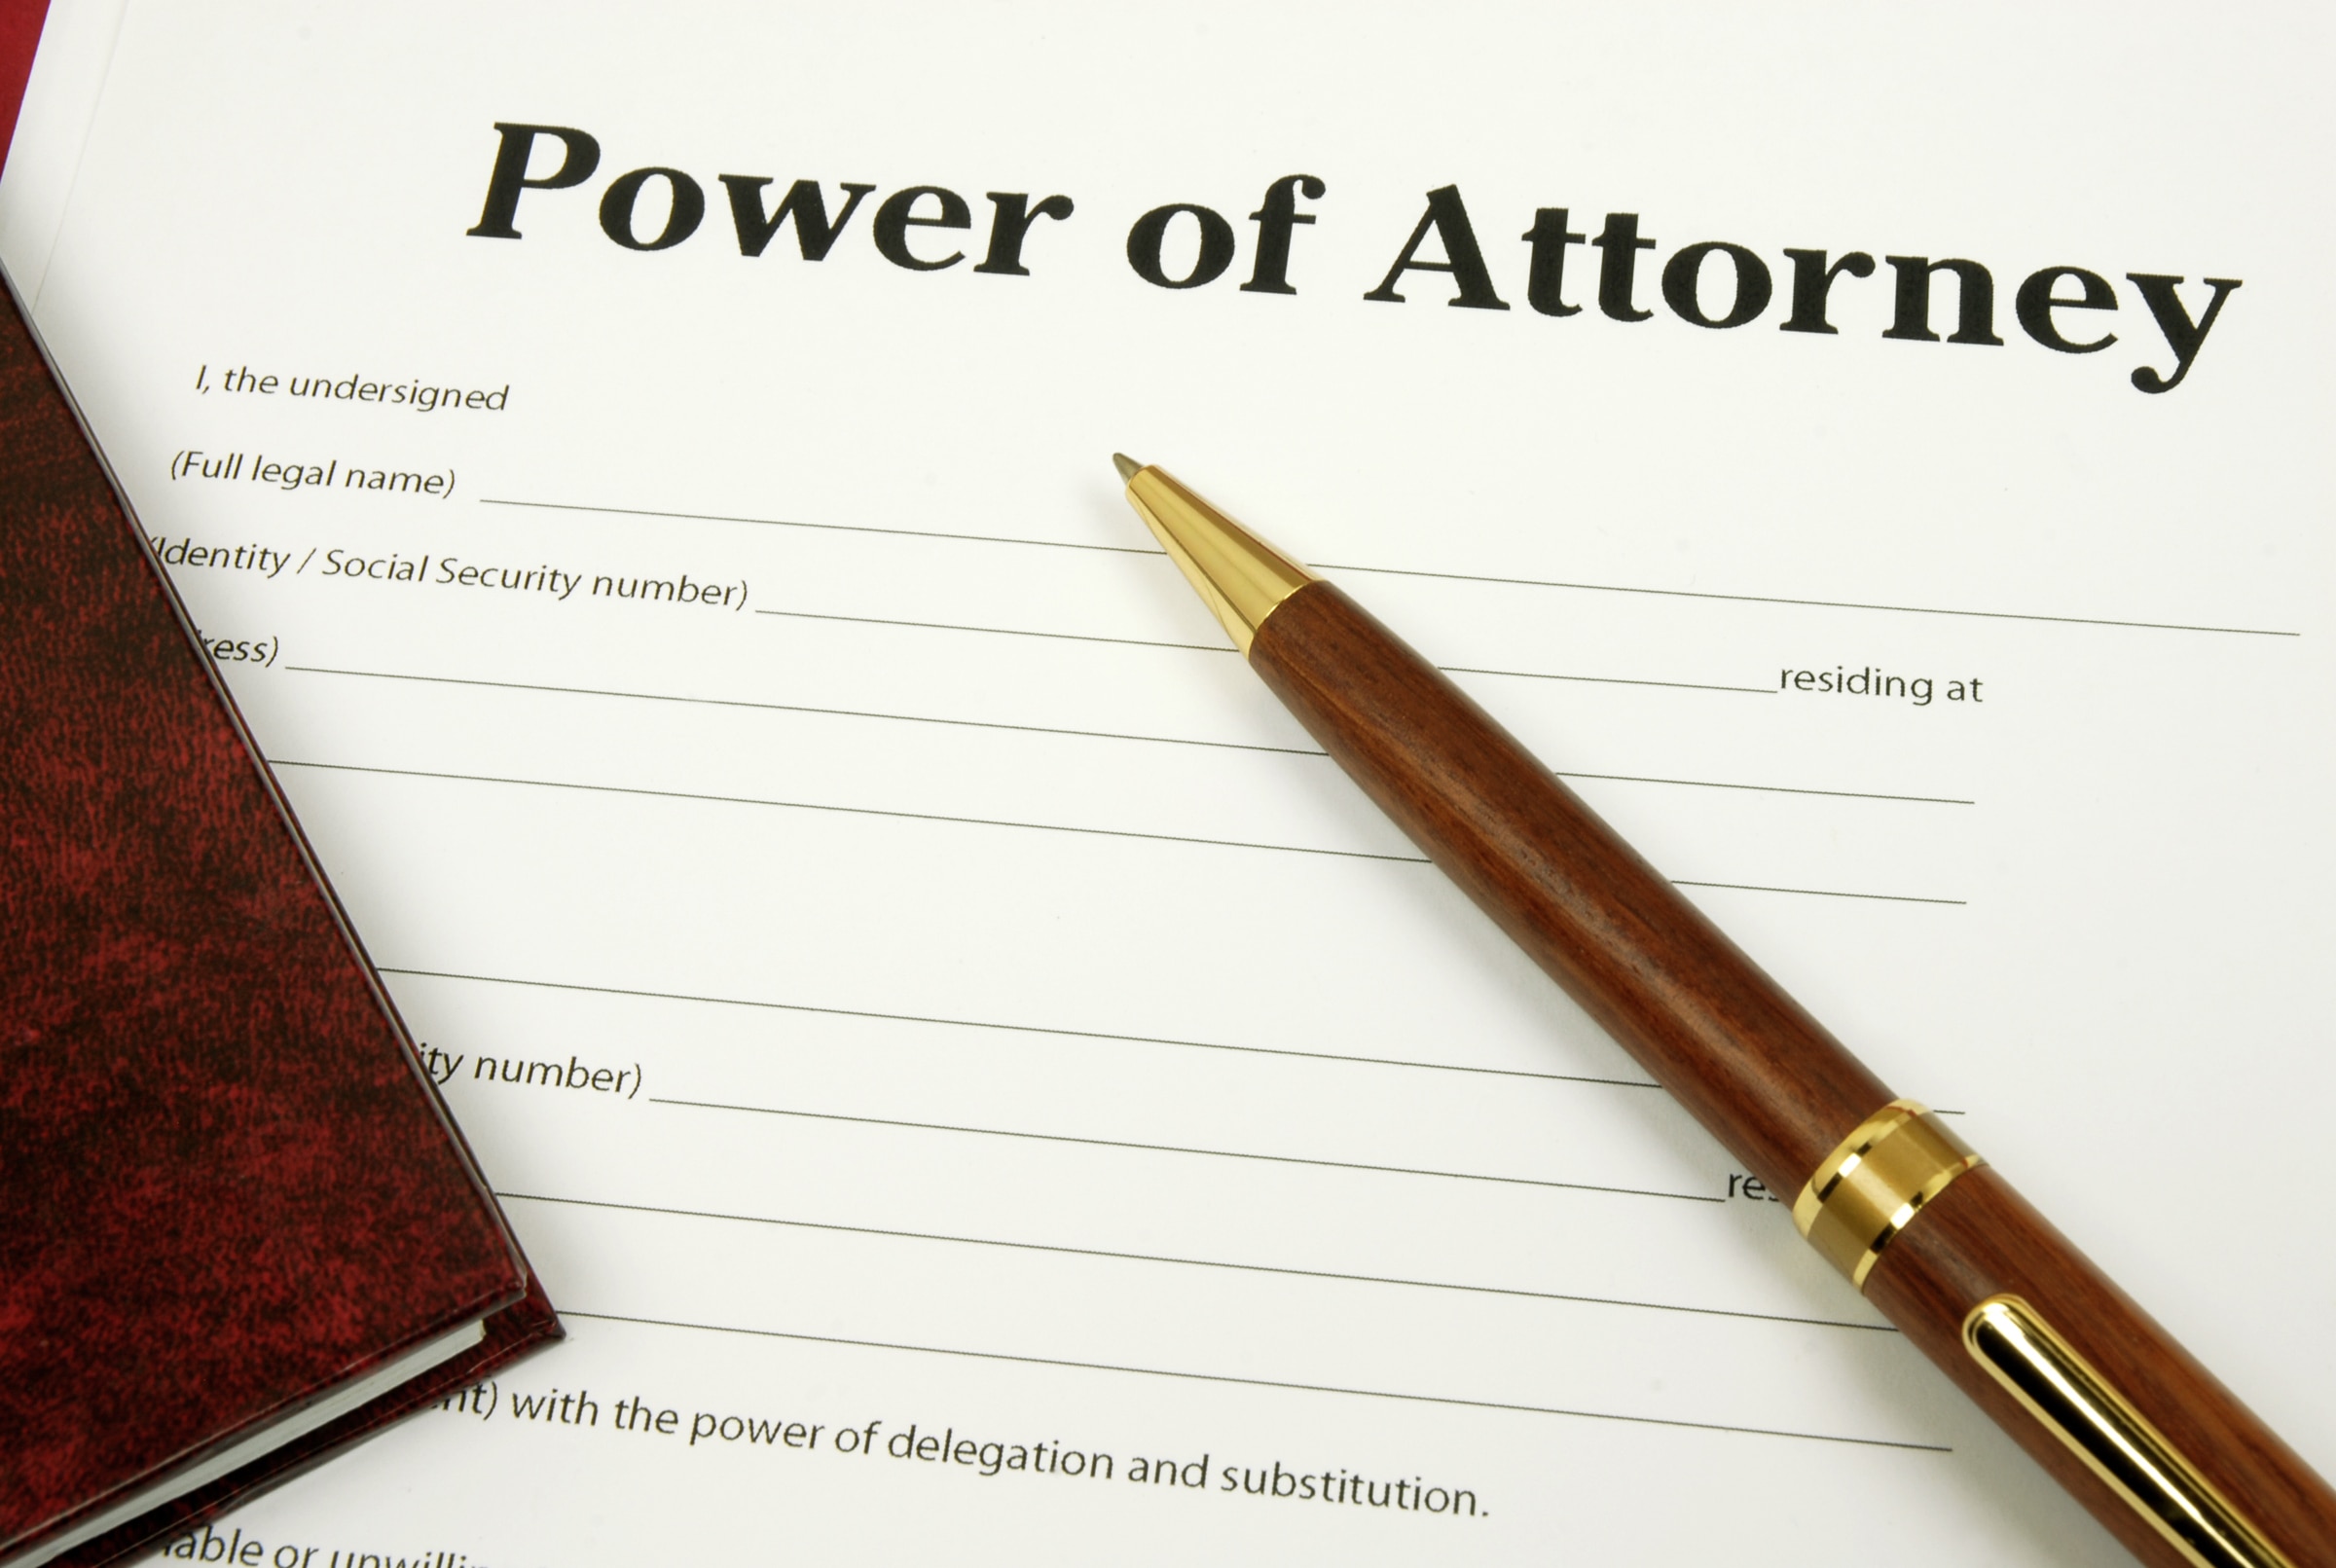 Lasting Power of Attorney explained